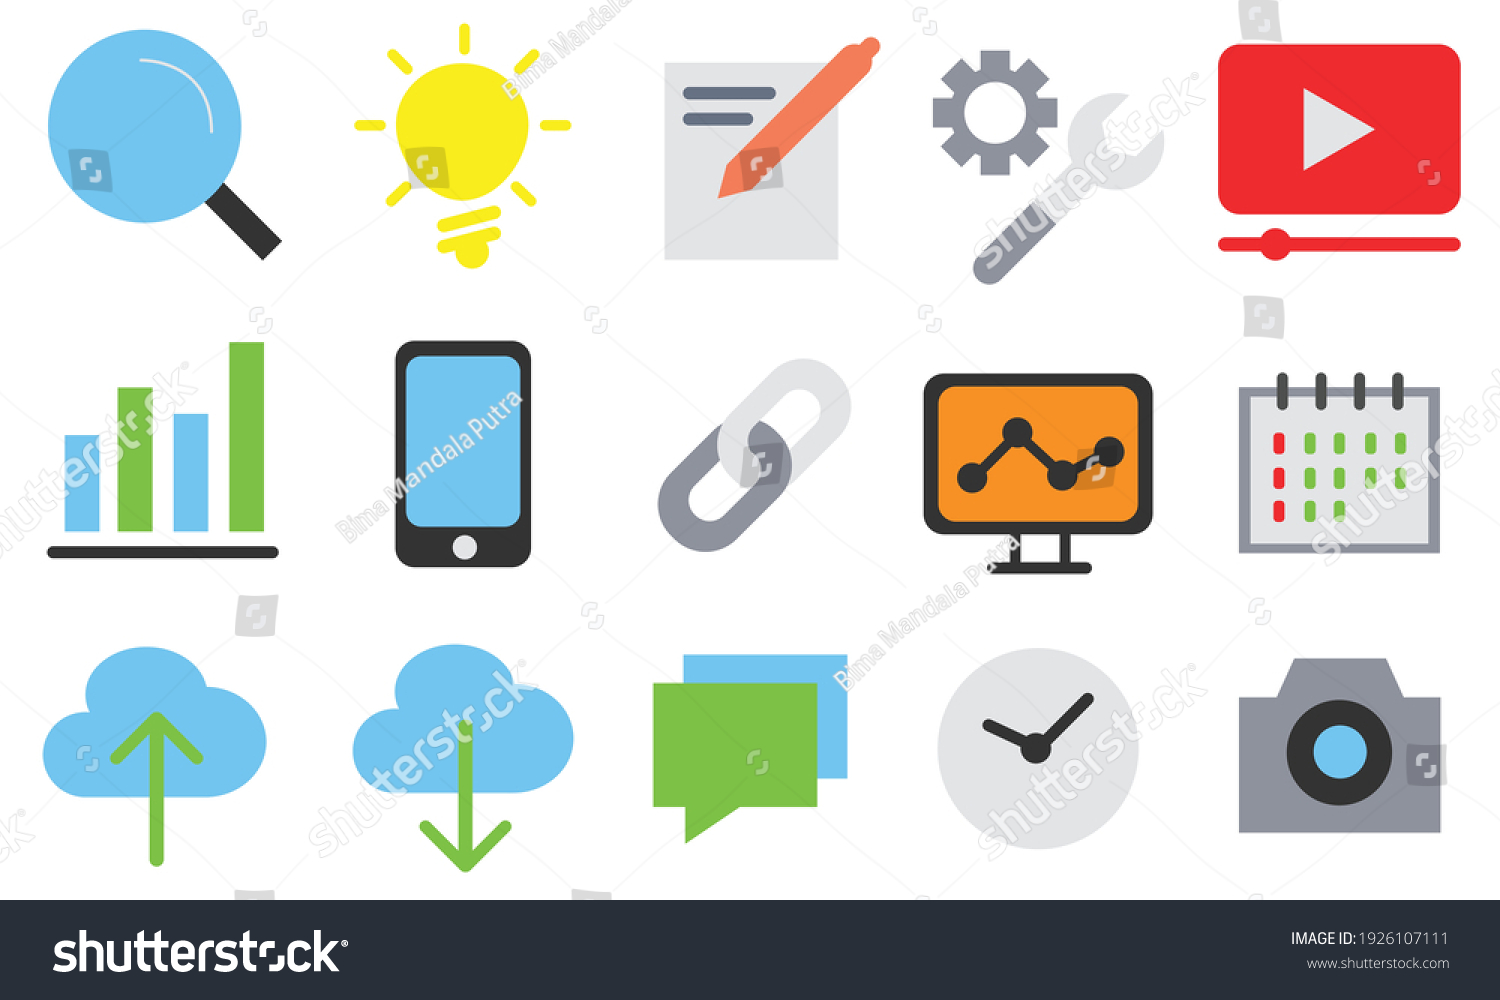 SVG of Vector icon set. Business, strategy, management and marketing, colorful flat design icon set. template elements for web and mobile applications. svg